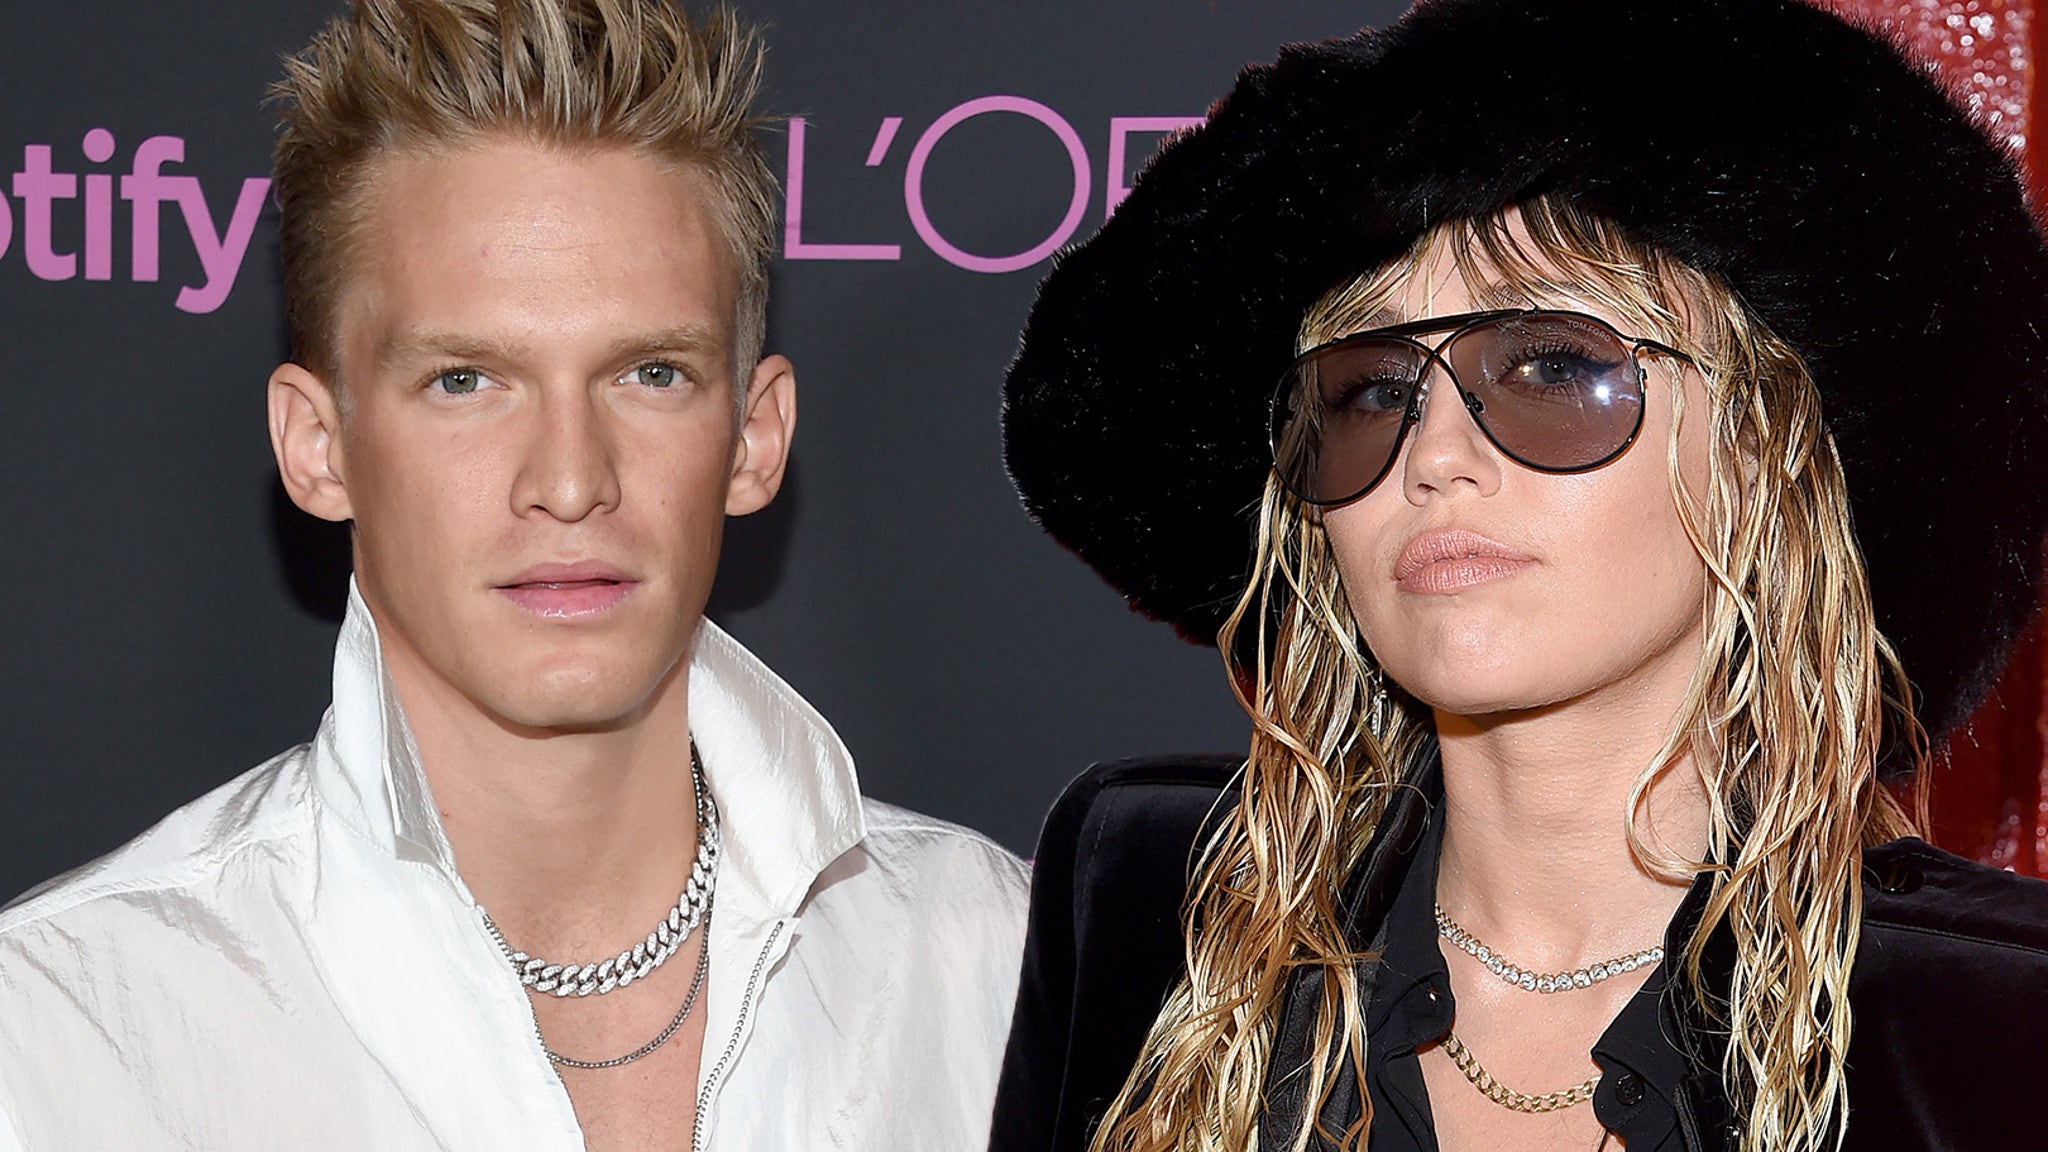 Miley Cyrus Reportedly Kissing and Making Out with Cody Simpson